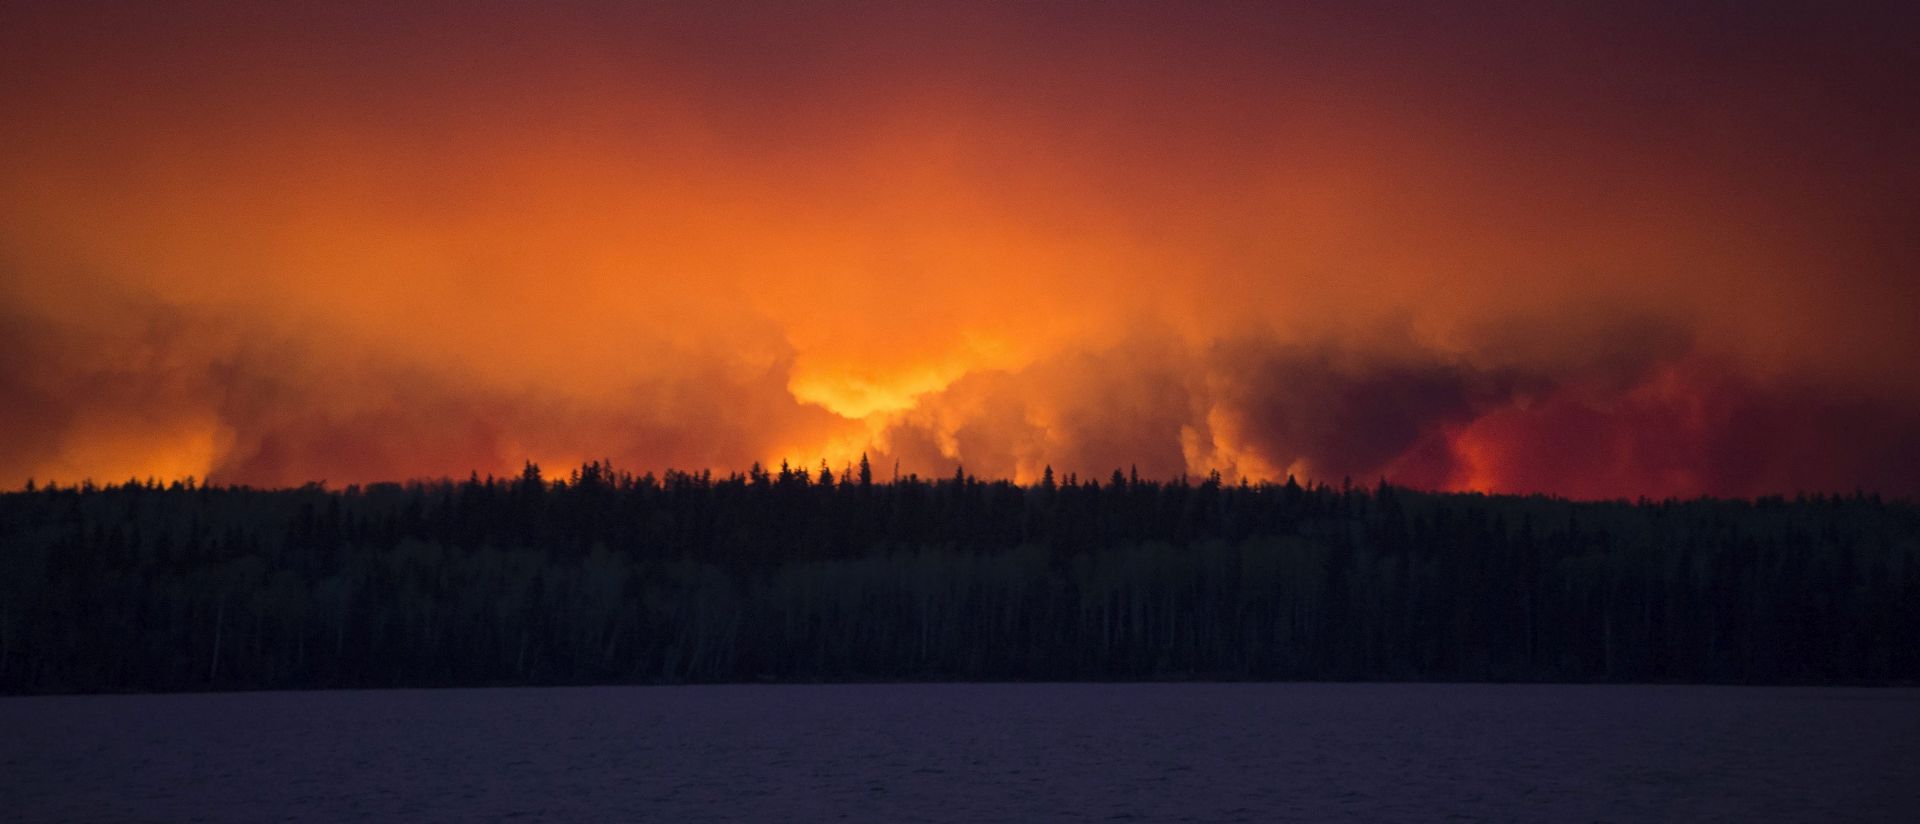 epa05291241 A handout photo provided by the Government of Alberta on 05 May 2016 shows a massive wildfire raging near Anzac, a hamlet 48 km southwest of Fort McMurray, Alberta, Canada, 04 May 2016. Weather conditions were making it more difficult to extinguish a forest fire that has forced the evacuation of some 80,000 people from the northwestern Canadian city of Fort McMurray. Alberta provincial authorities estimated that at least some 1,600 buildings in the city have been consumed by the flames, which have not caused any deaths or injuries so far.  EPA/CHRIS SCHWARZ / GOVERNMENT OF ALBERTA / HANDOUT  HANDOUT EDITORIAL USE ONLY/NO SALES